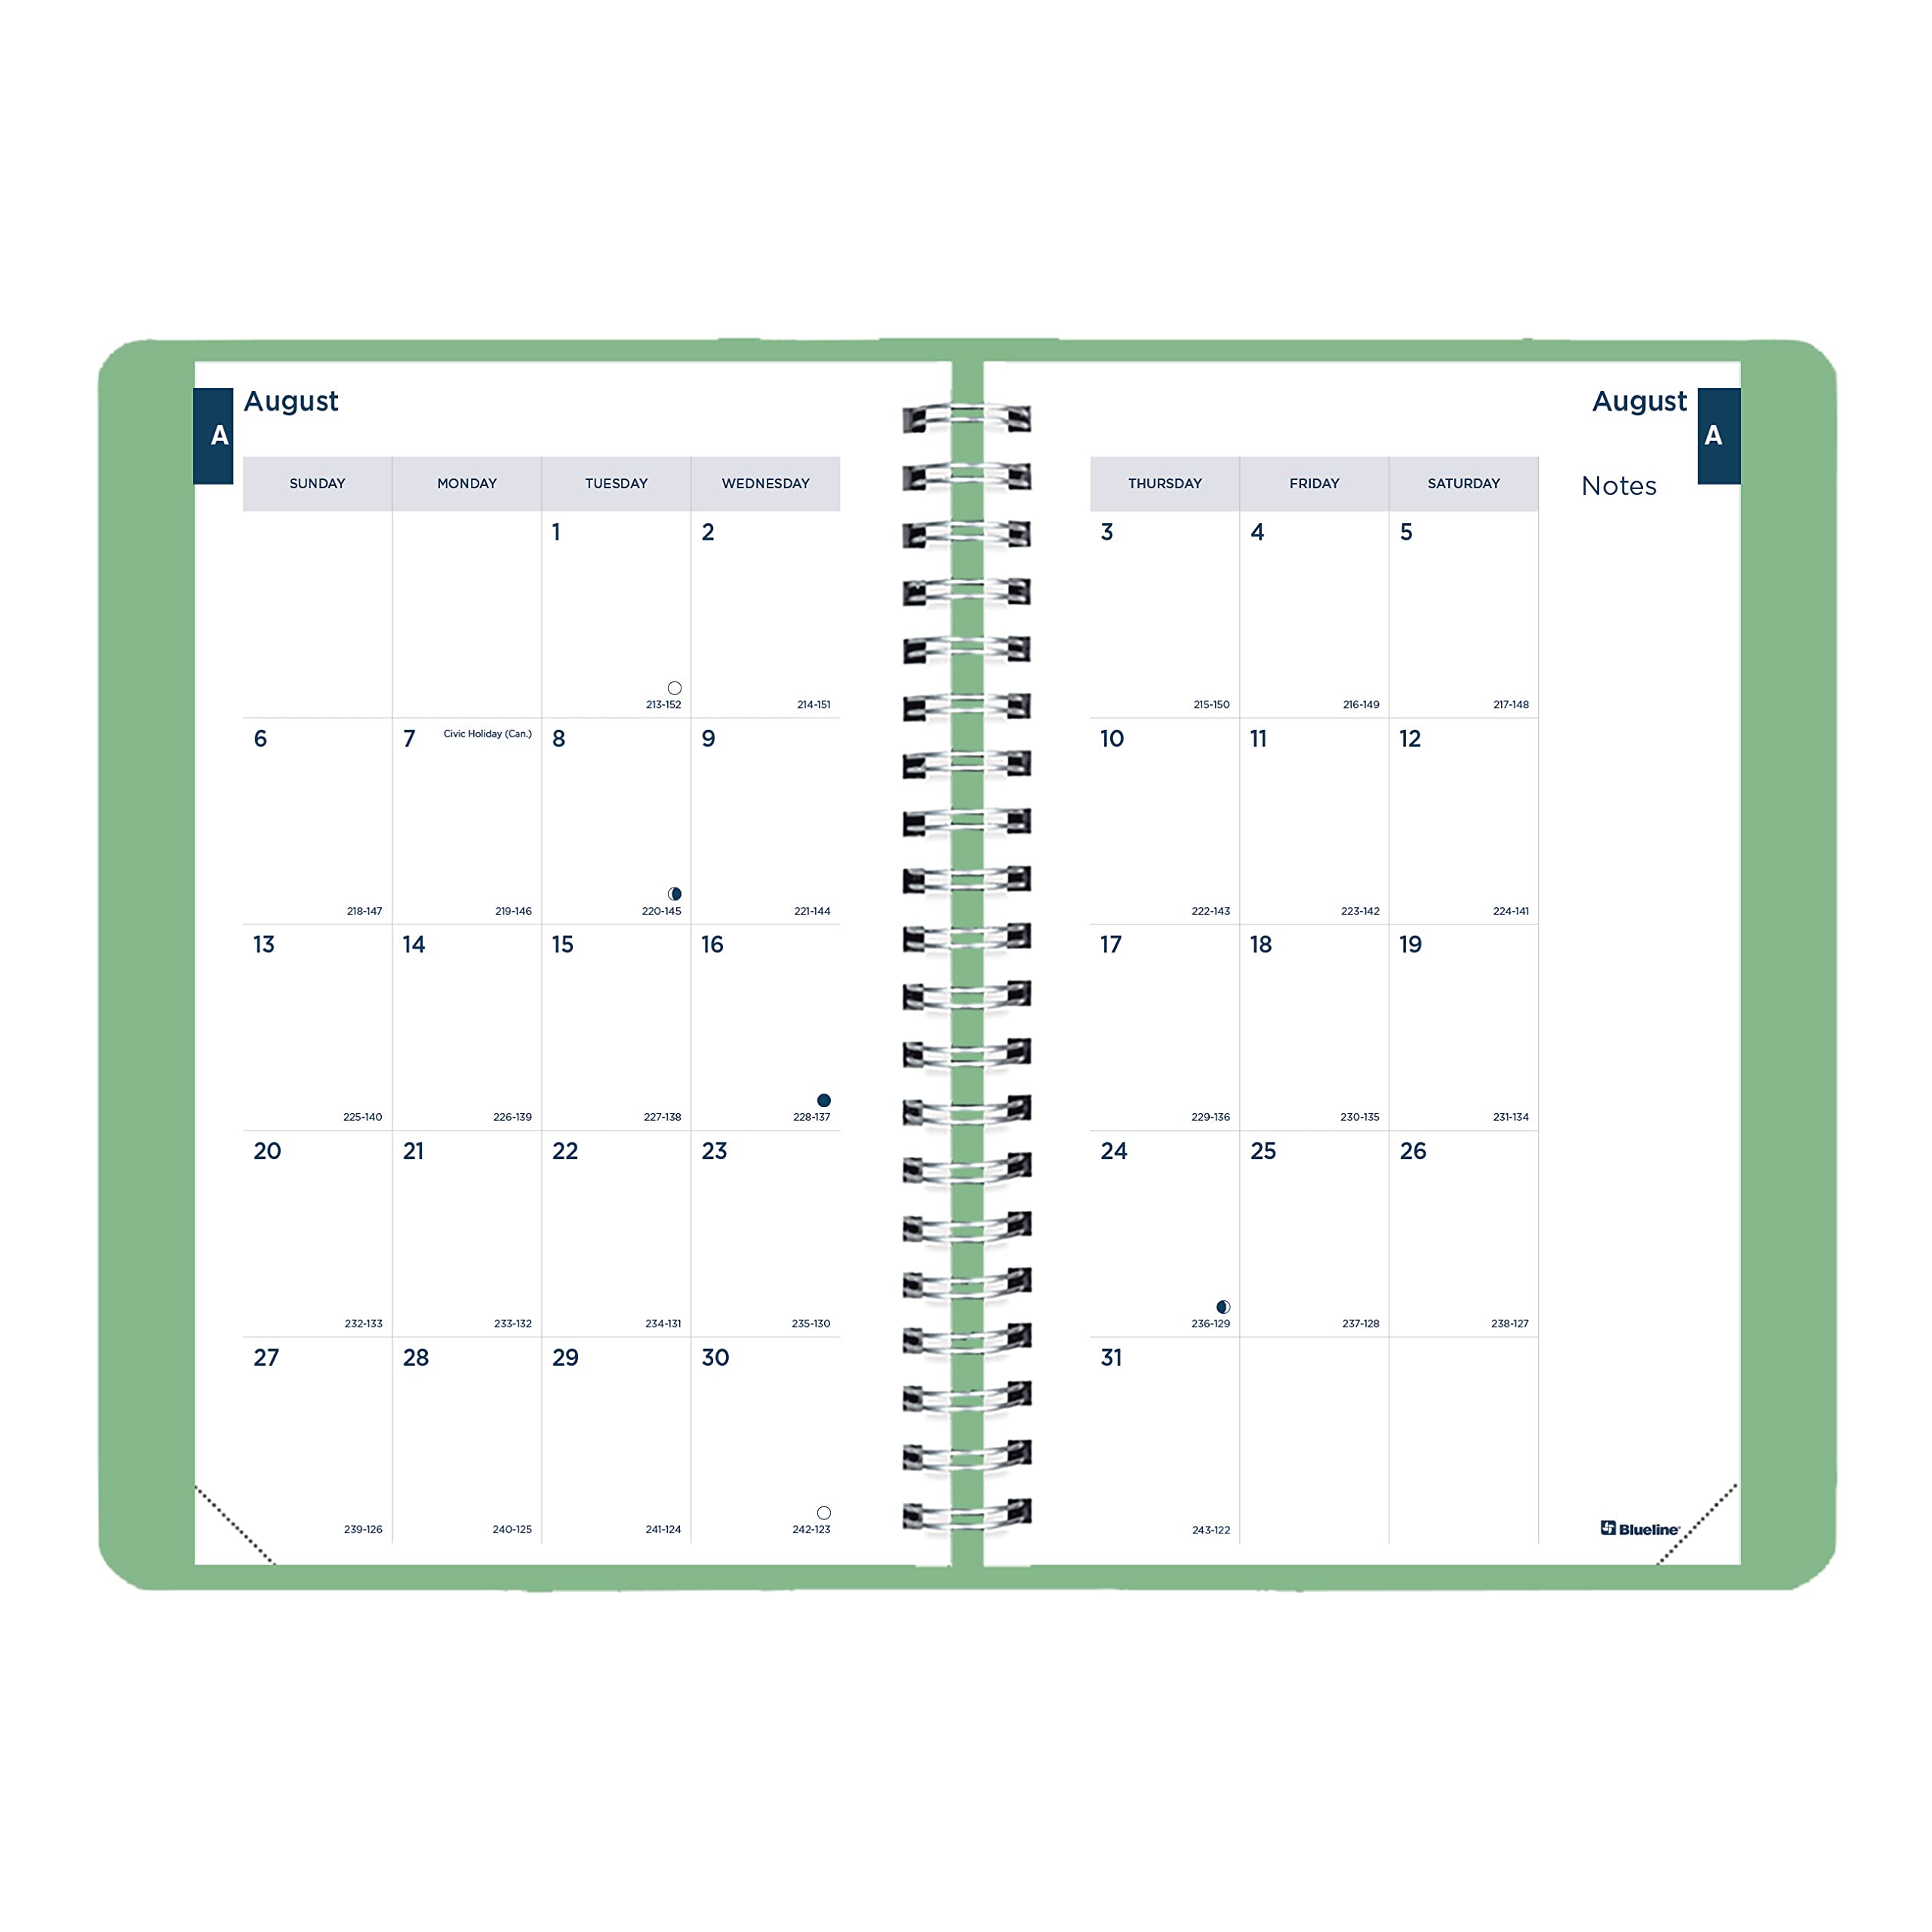 Blueline Essential Academic Daily/Monthly Planner, August 2023 to July 2024, Twin-Wire Binding, Soft Vicuana Cover, 8" x 5", Mint Green (CA201F.03-24)